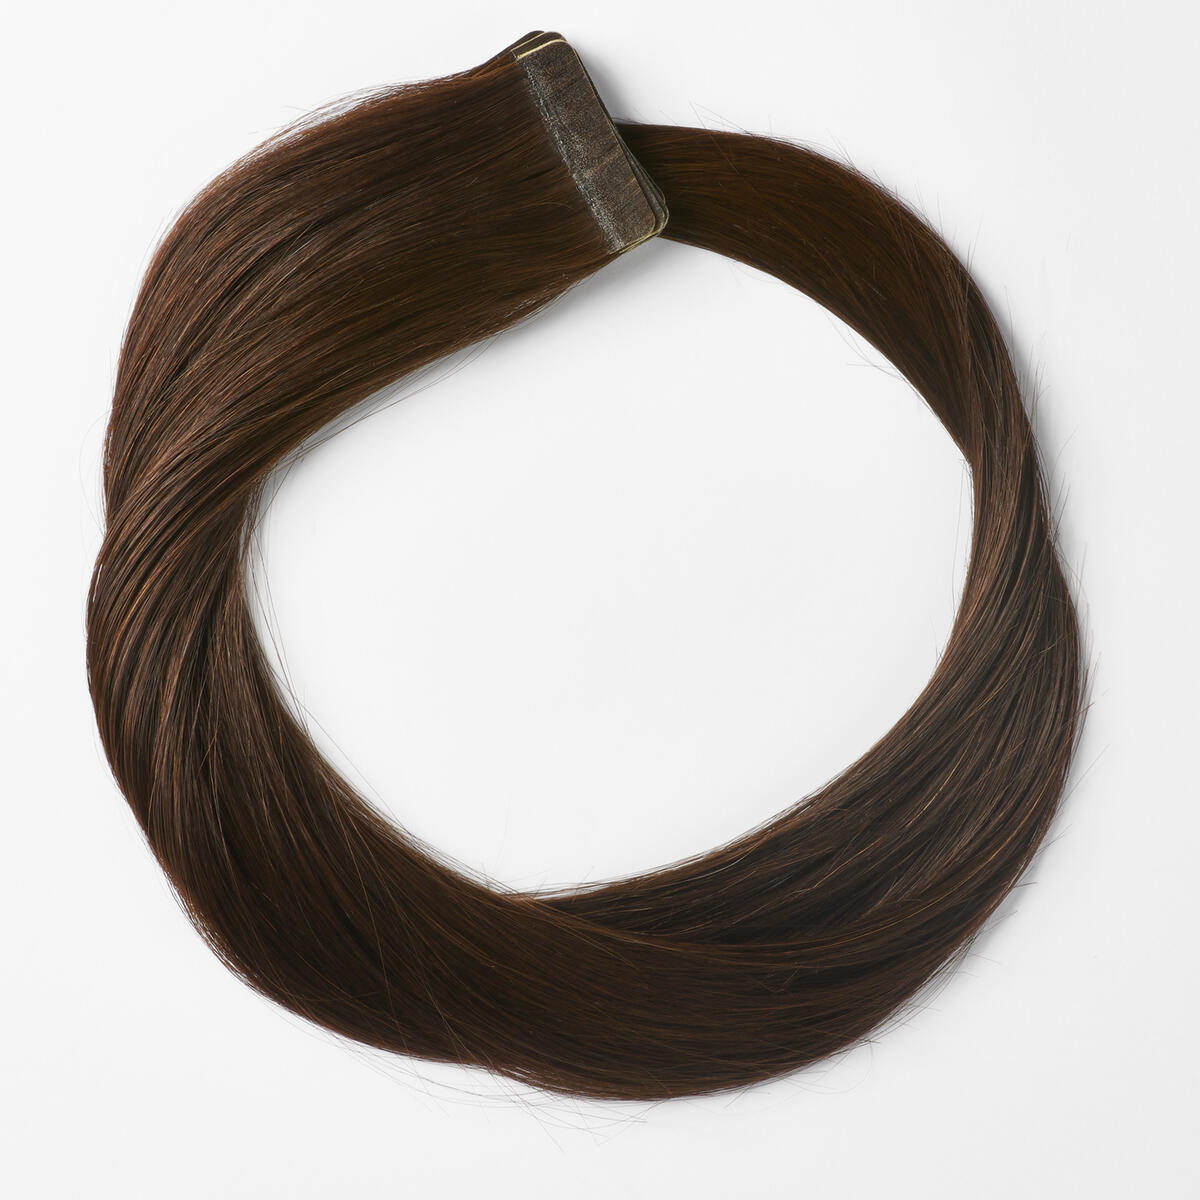 Basic Tape Extensions Classic 4 2.3 Chocolate Brown 50 cm